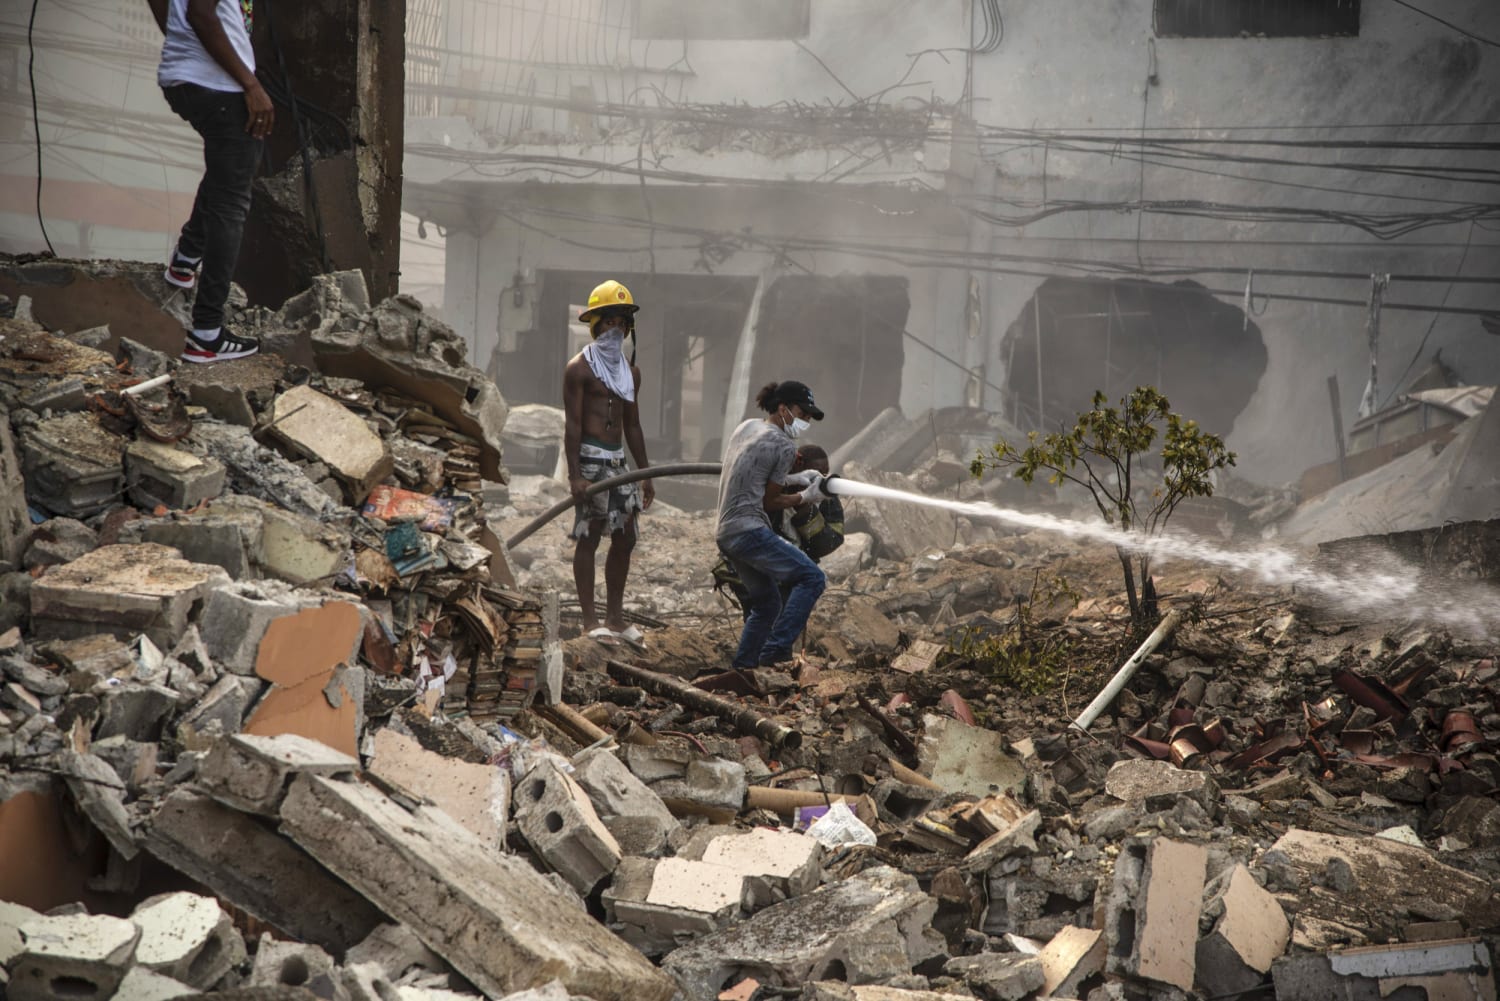 At least 10 dead in powerful explosion in the Dominican Republic ...